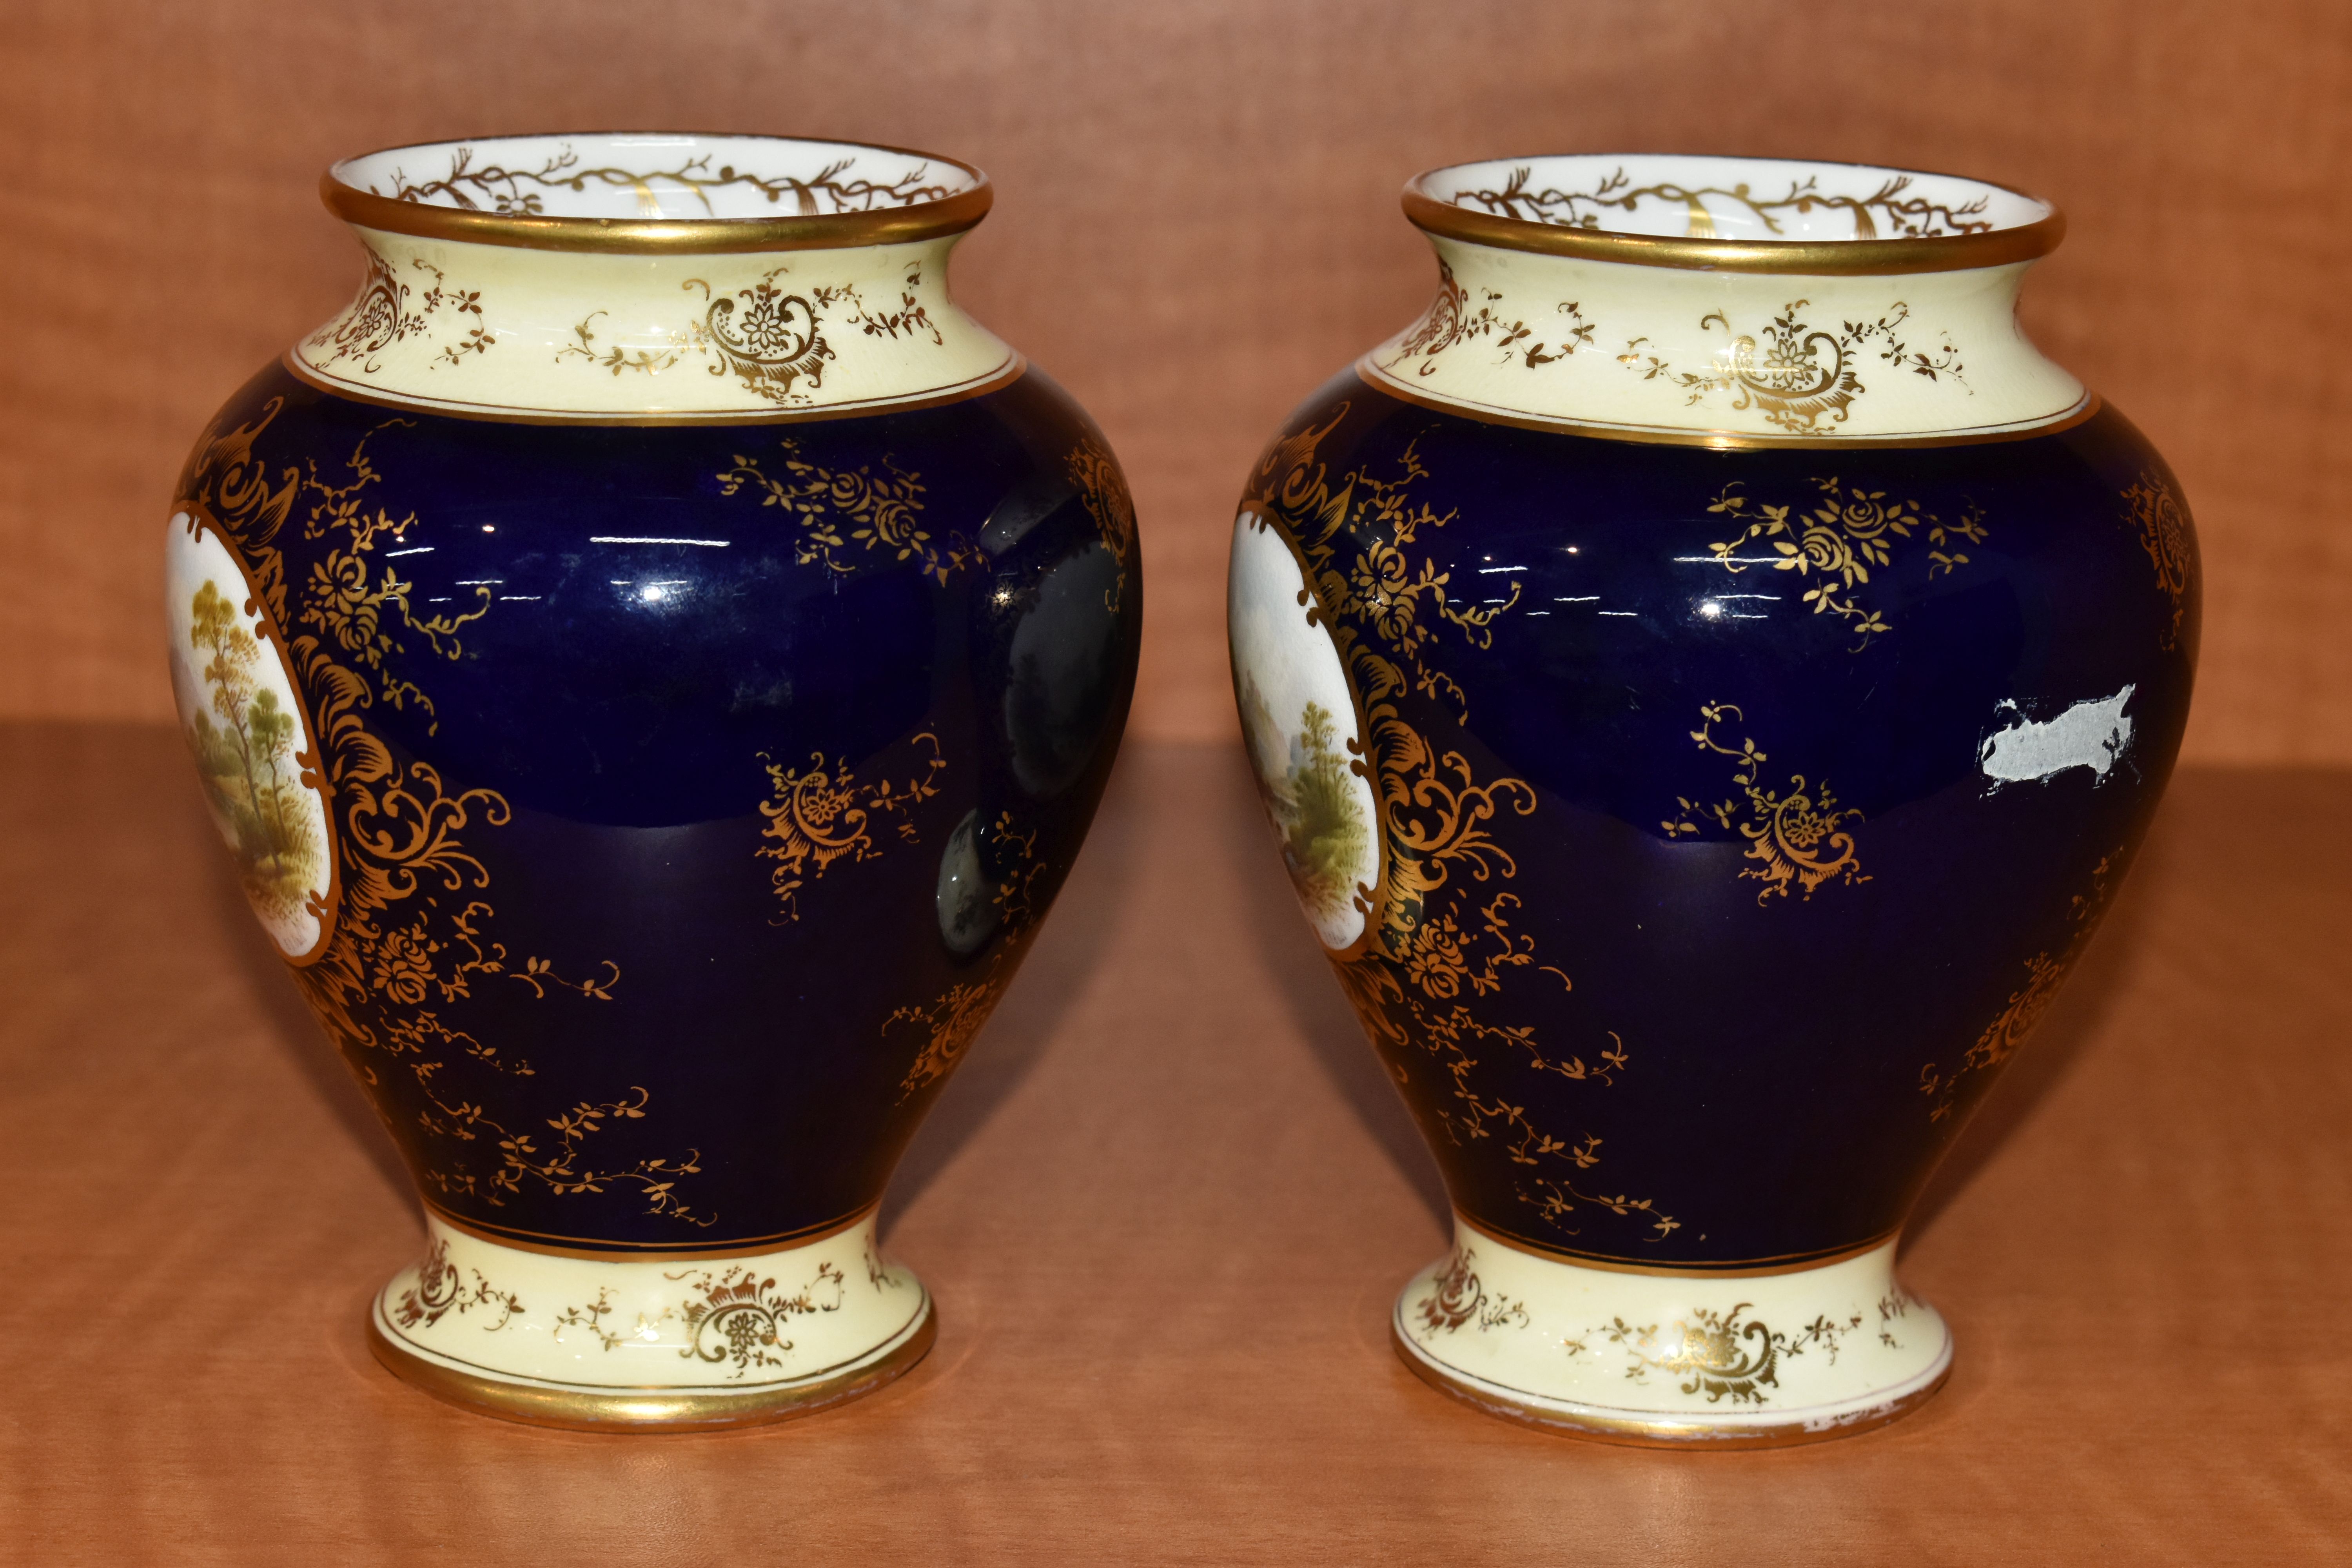 A PAIR OF LATE 19TH / EARLY 20TH CENTURY COALPORT BALUSTER VASES, blue, pale yellow and gilt - Image 7 of 9